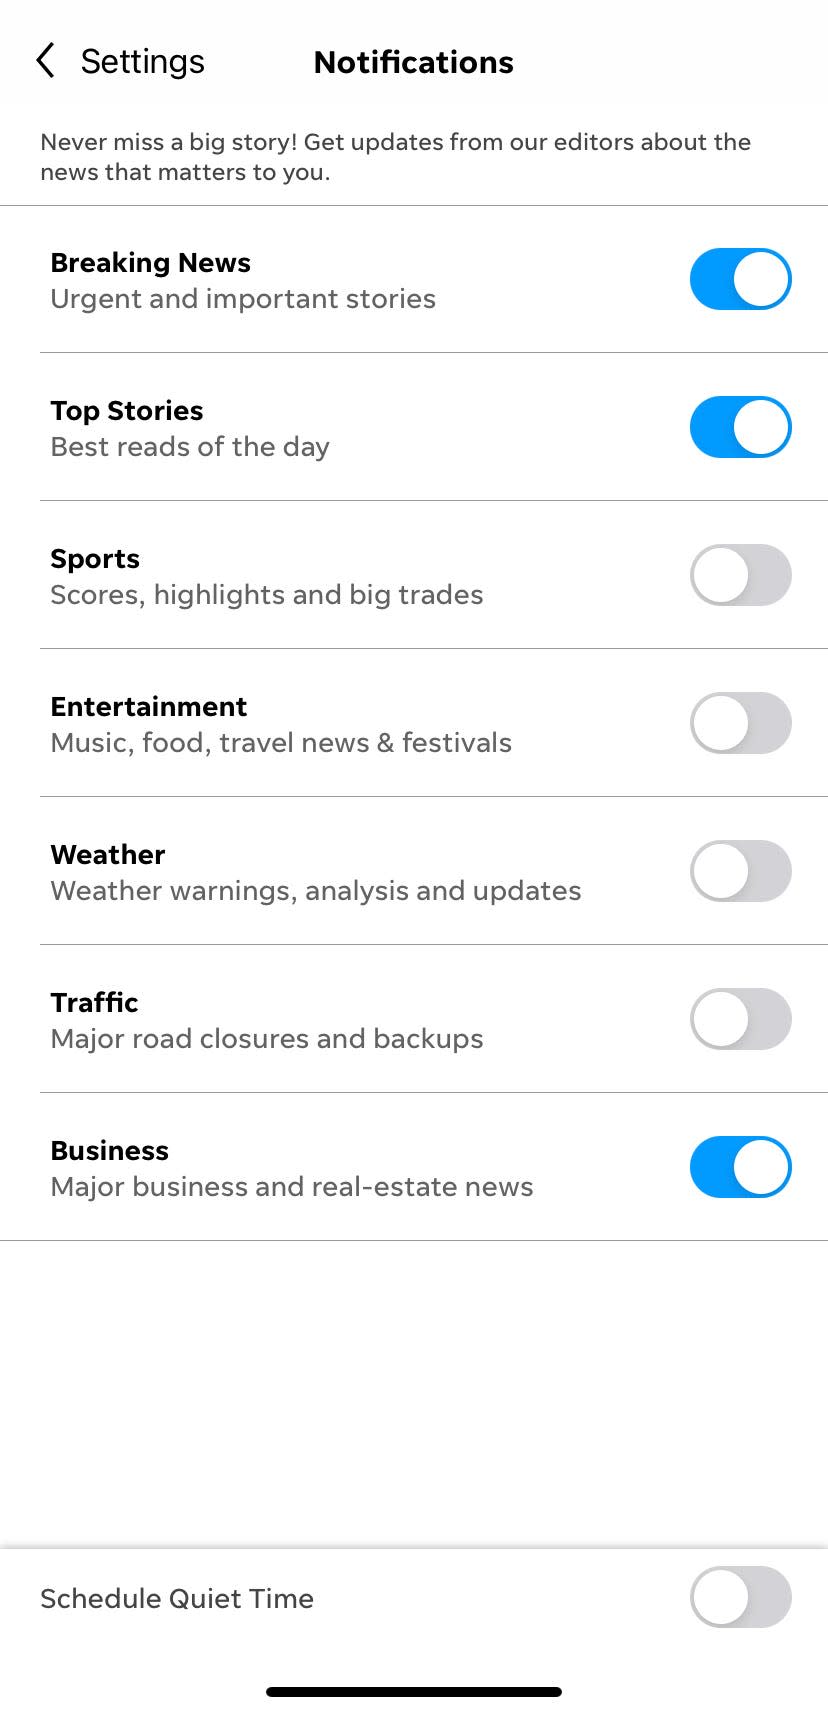 Under settings, users can choose how and when you get notifications, ranging from breaking news in your community to the top stories by subject matter.